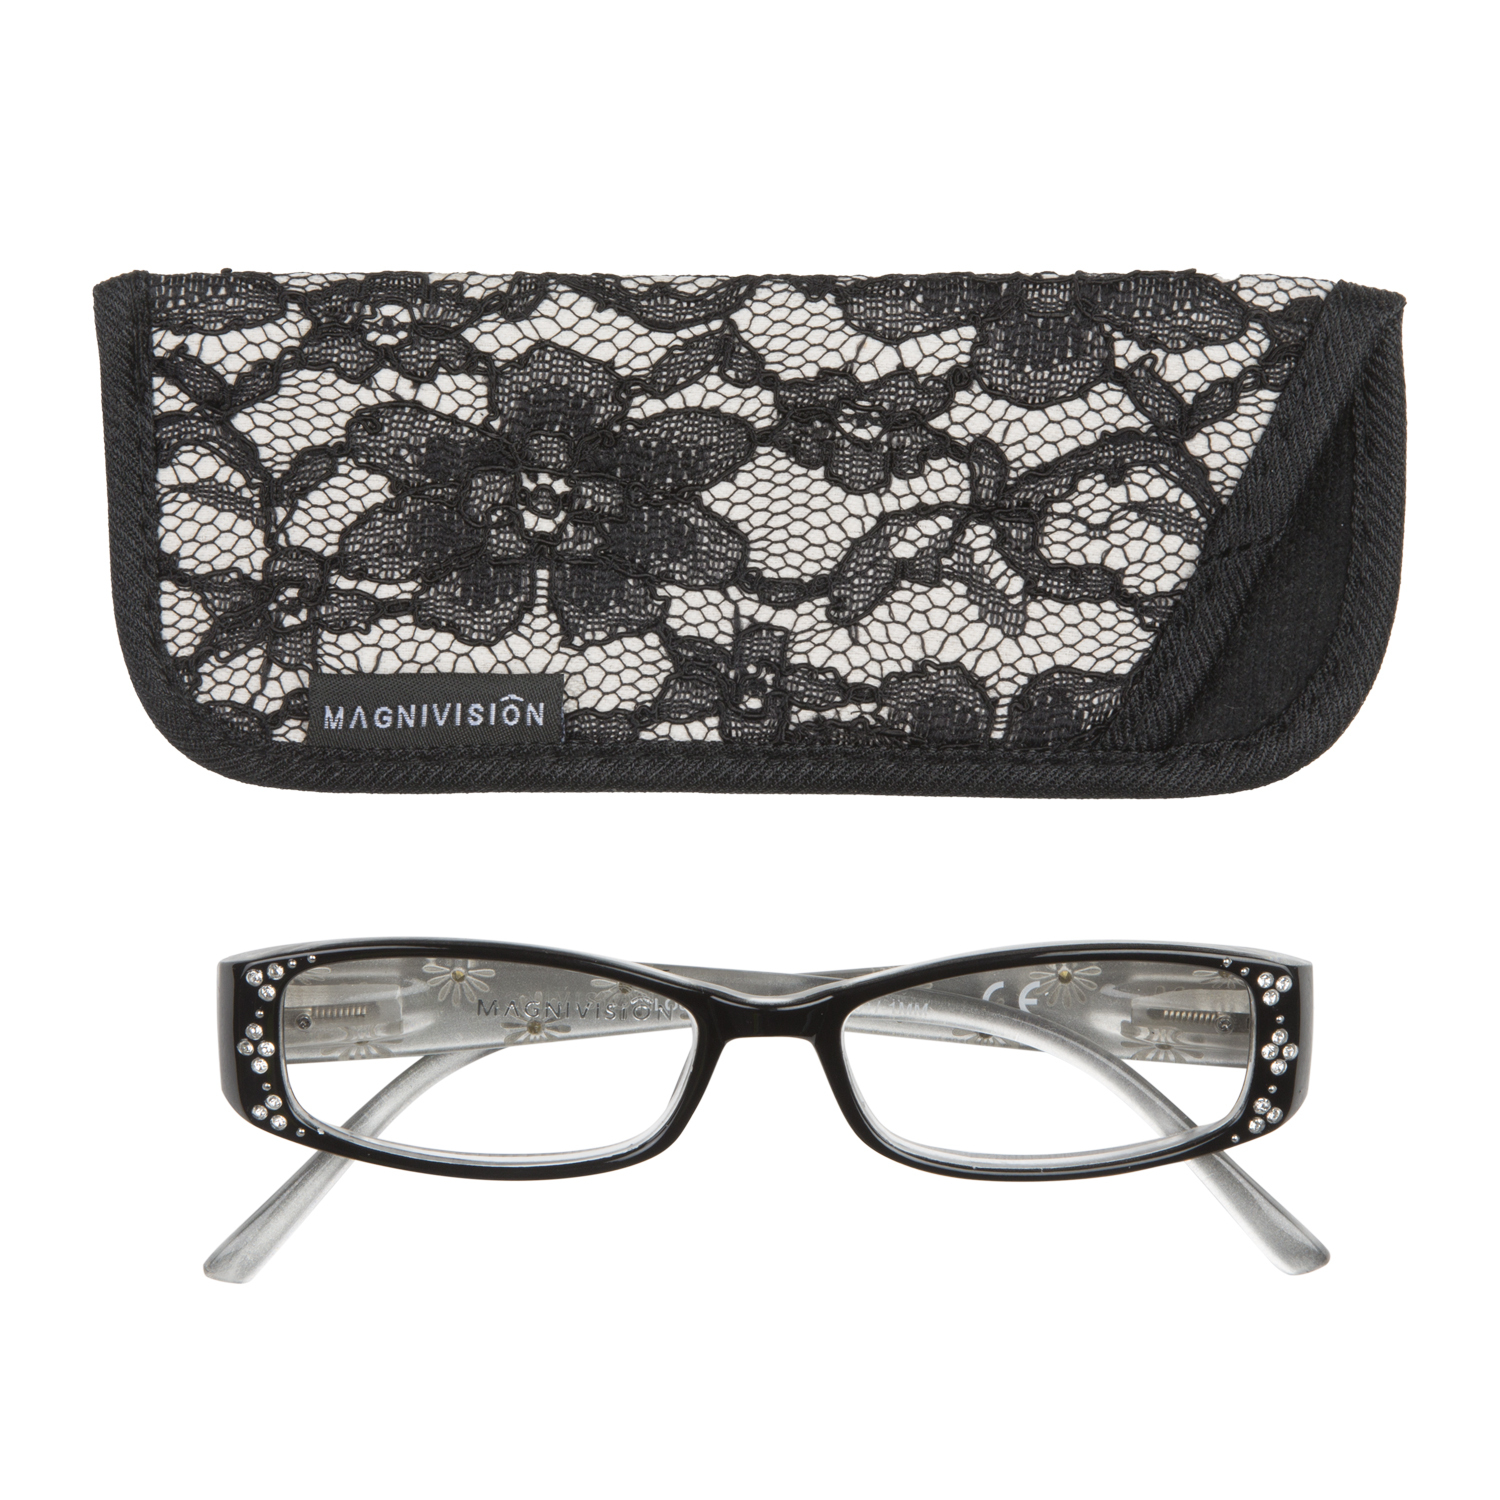 Tilly Magnivision Reading Glasses - 1.00 Image 2